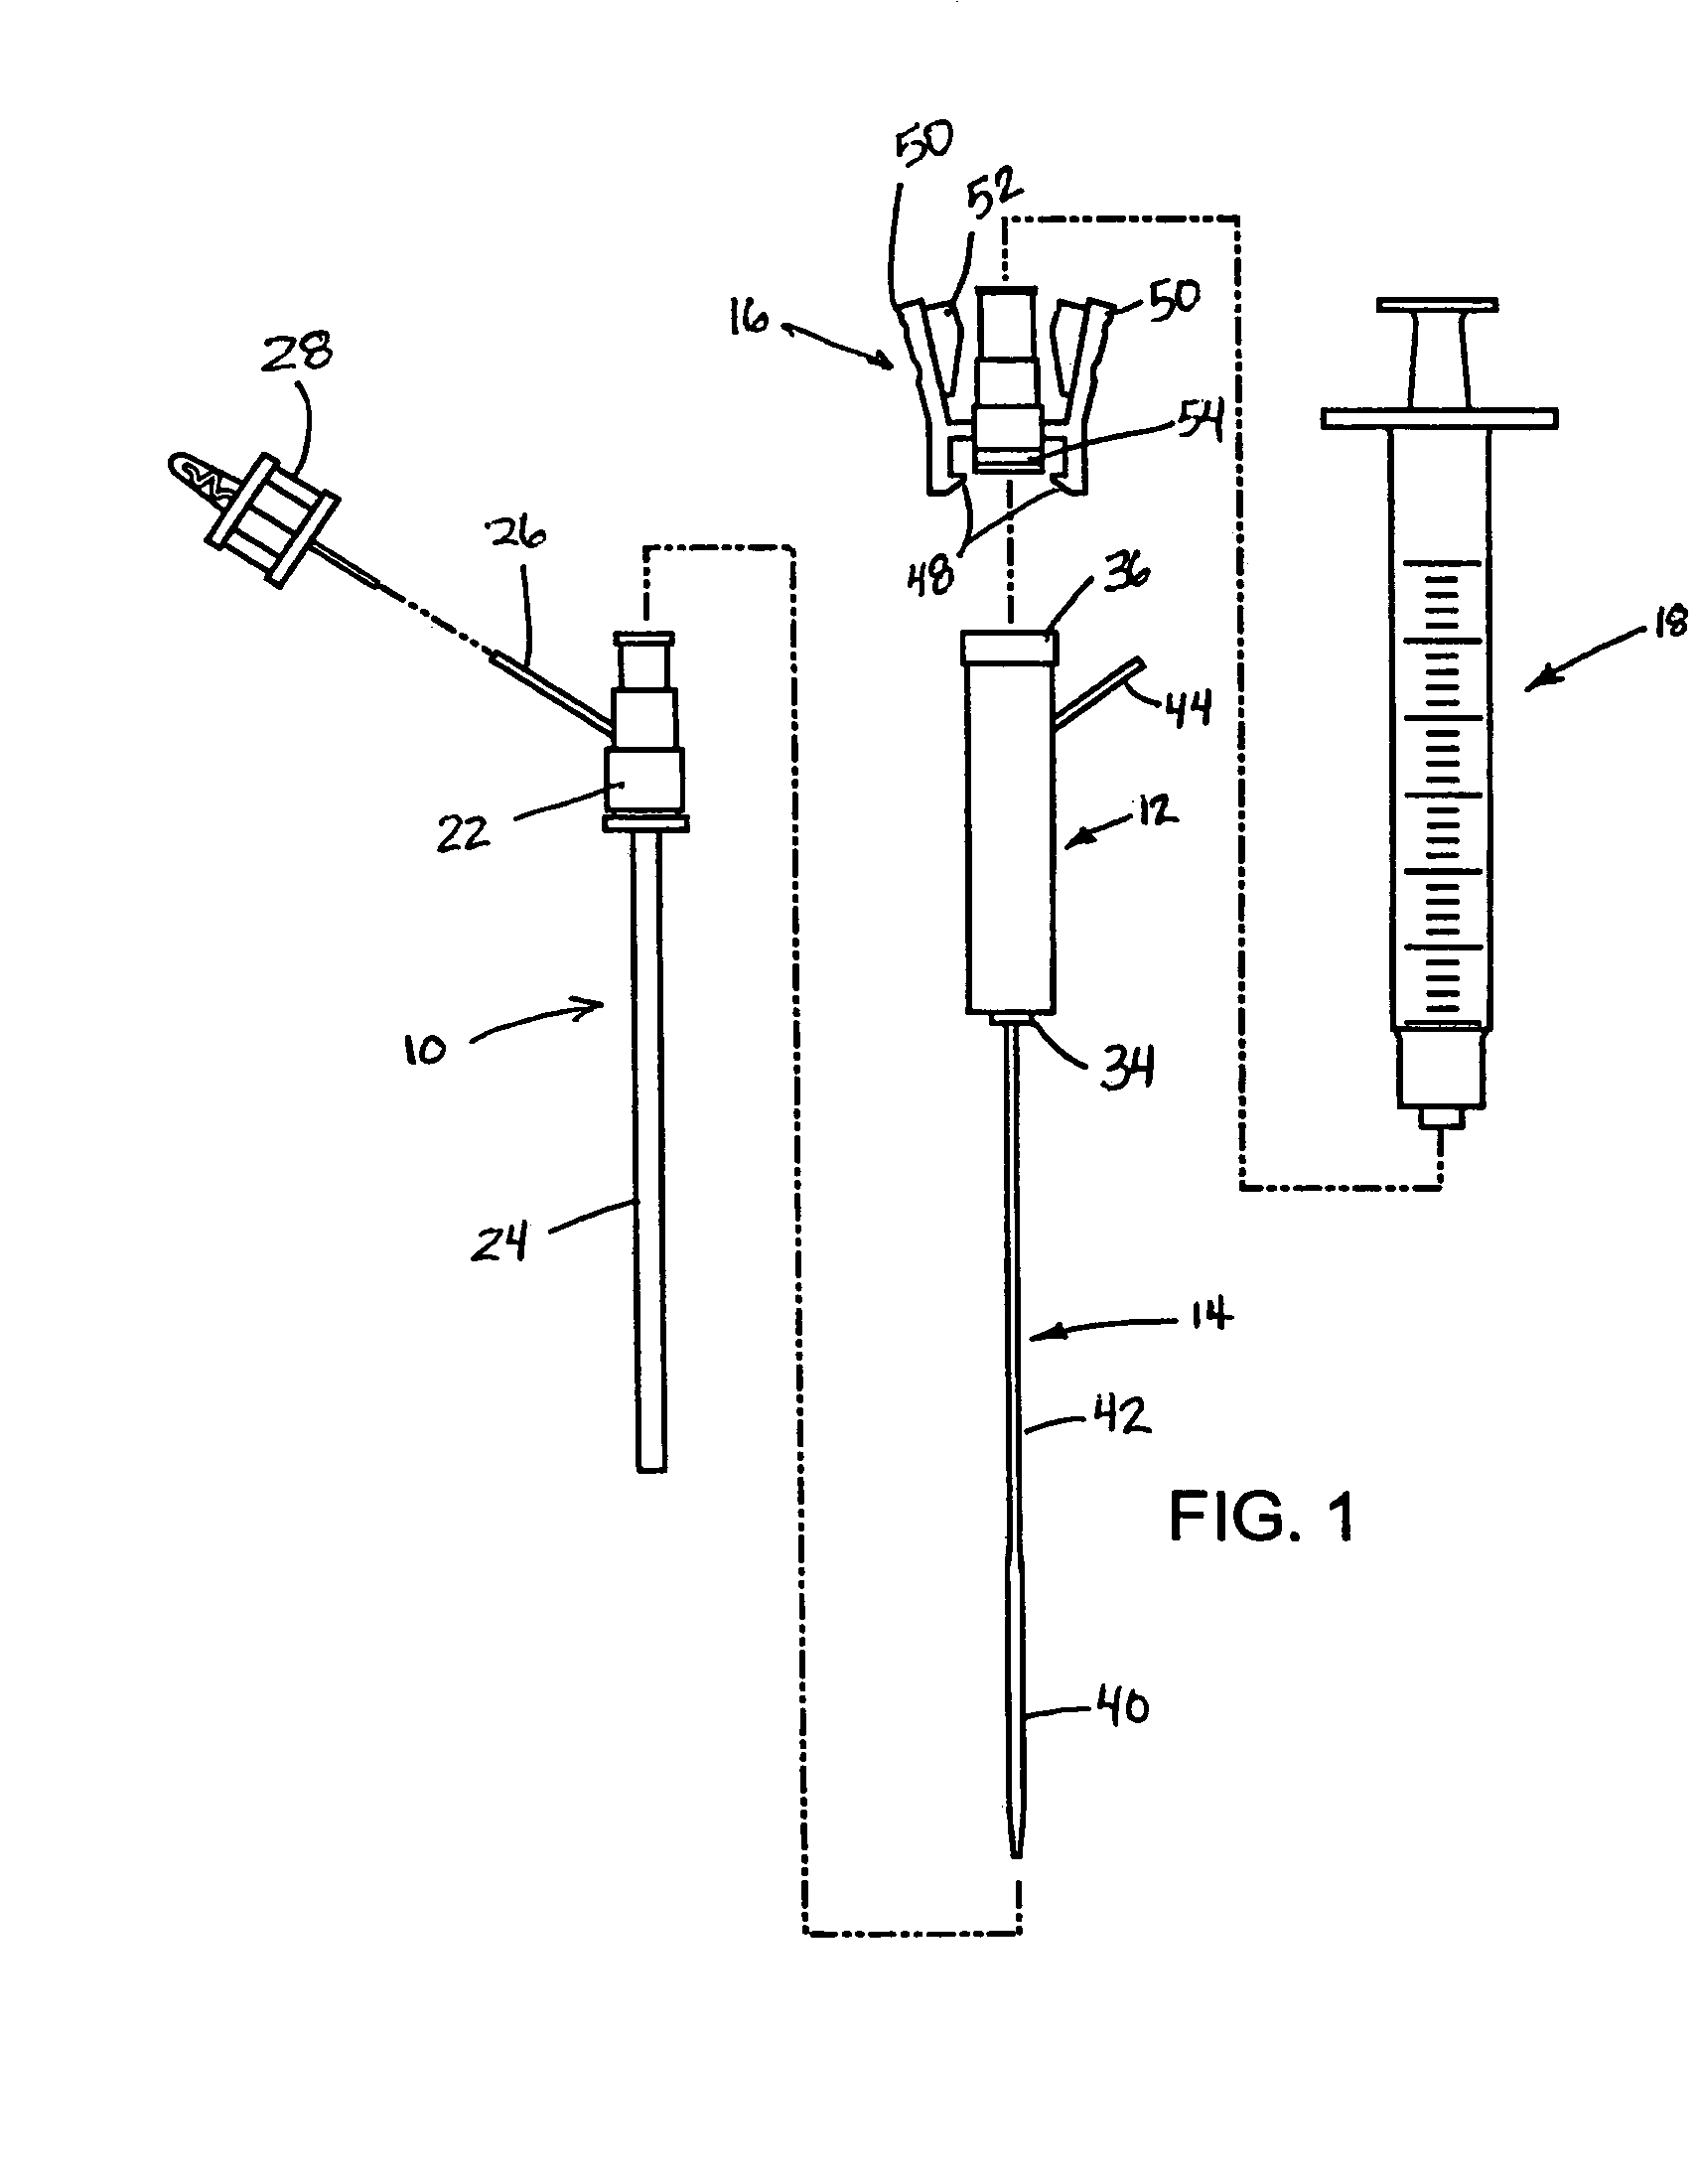 Pledget-handling system and method for delivering hemostasis promoting material to a blood vessel puncture site by fluid pressure